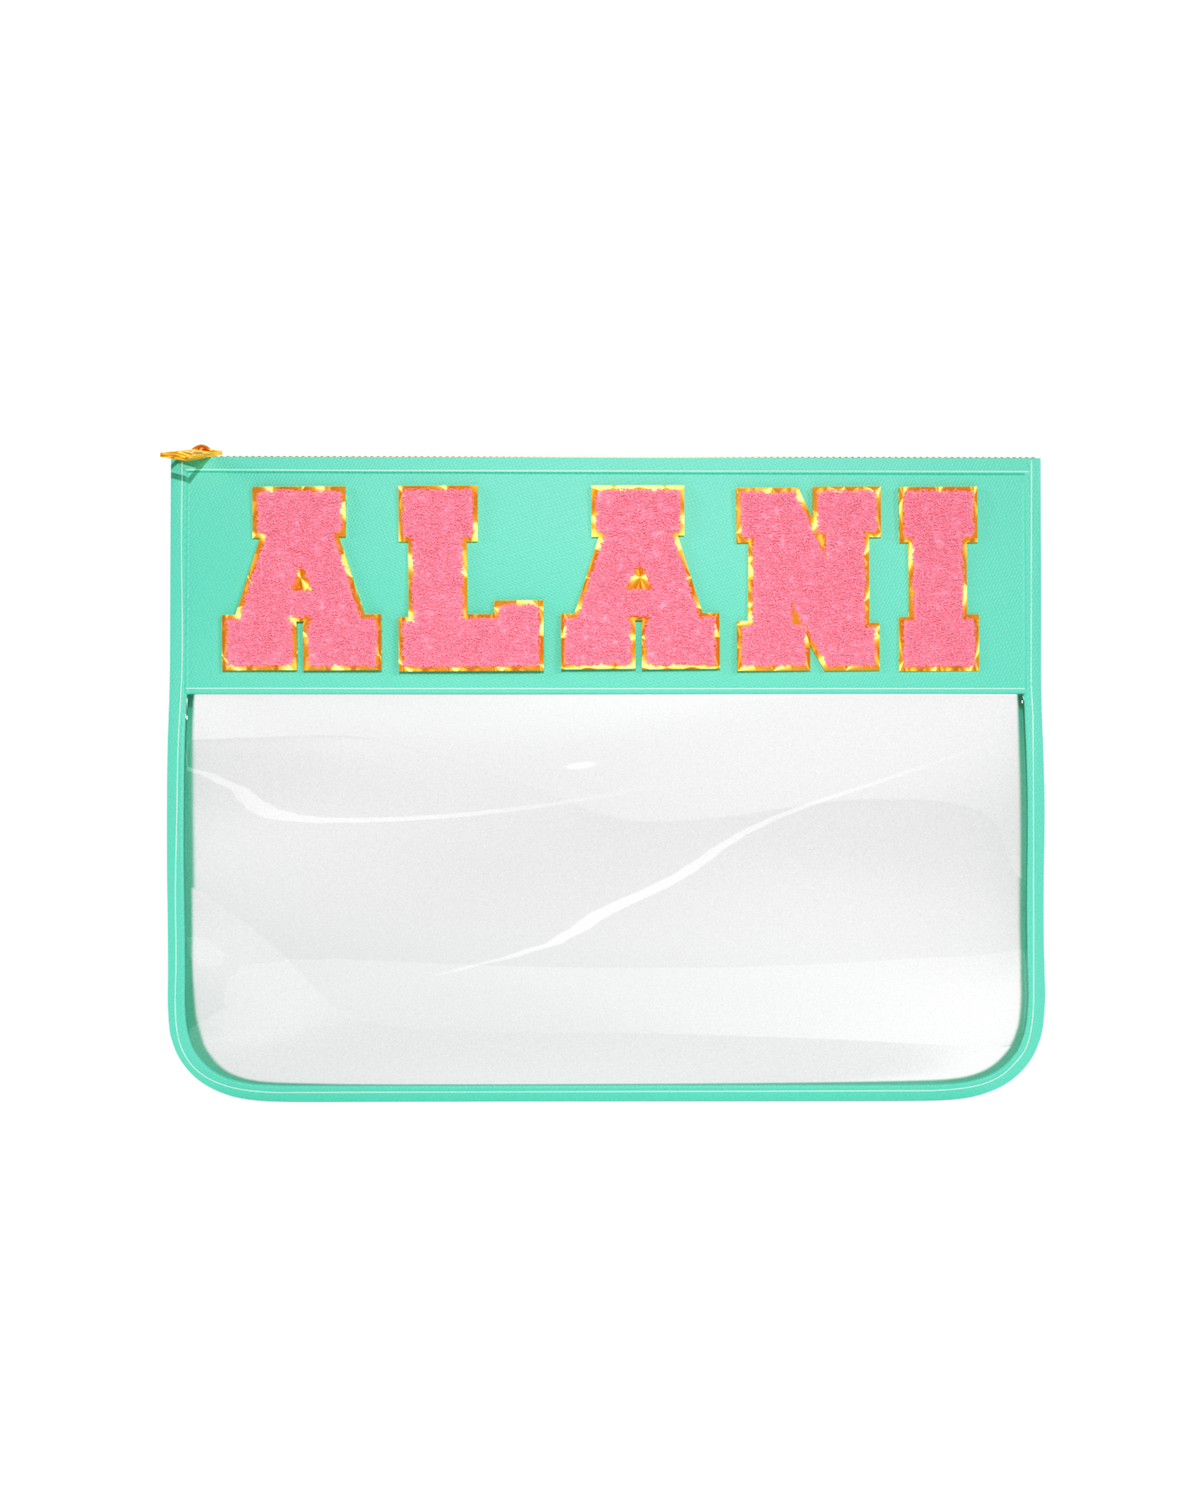 A front view of a alani nu pouch.